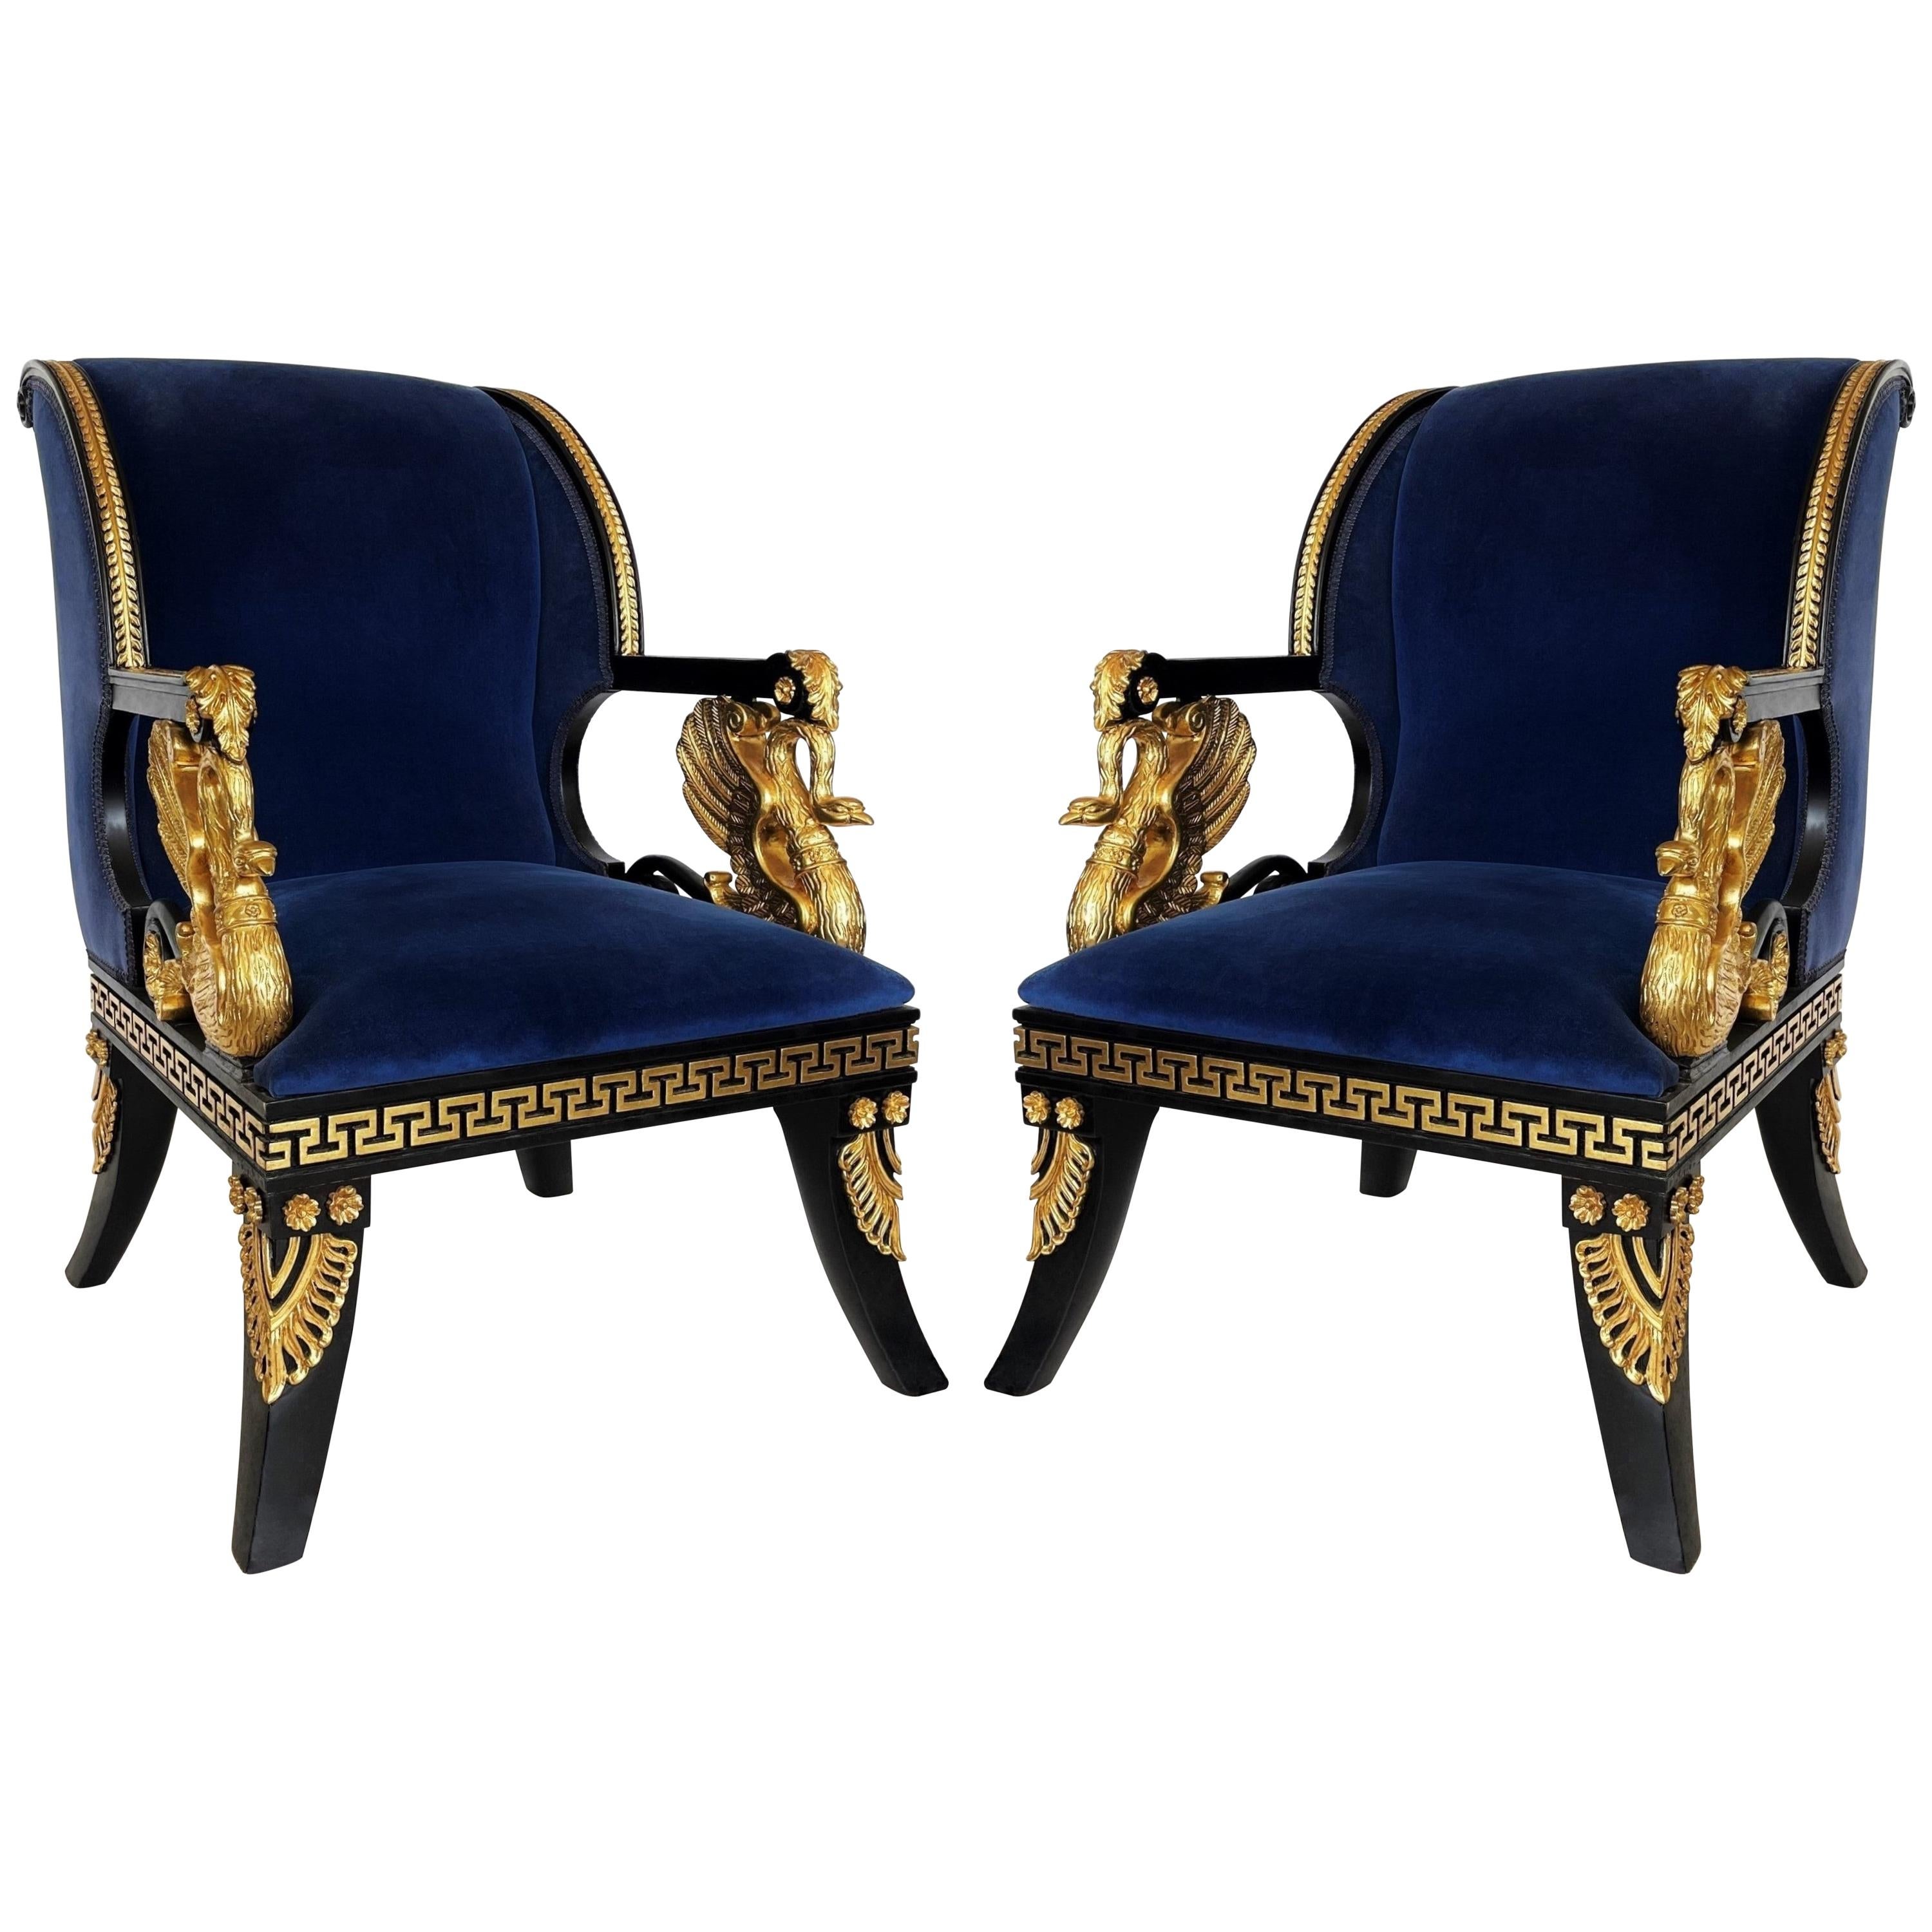 Neoclassic Pair of Lacquered & Parcel-Gilt Open Armchairs Manner of Thomas Hope